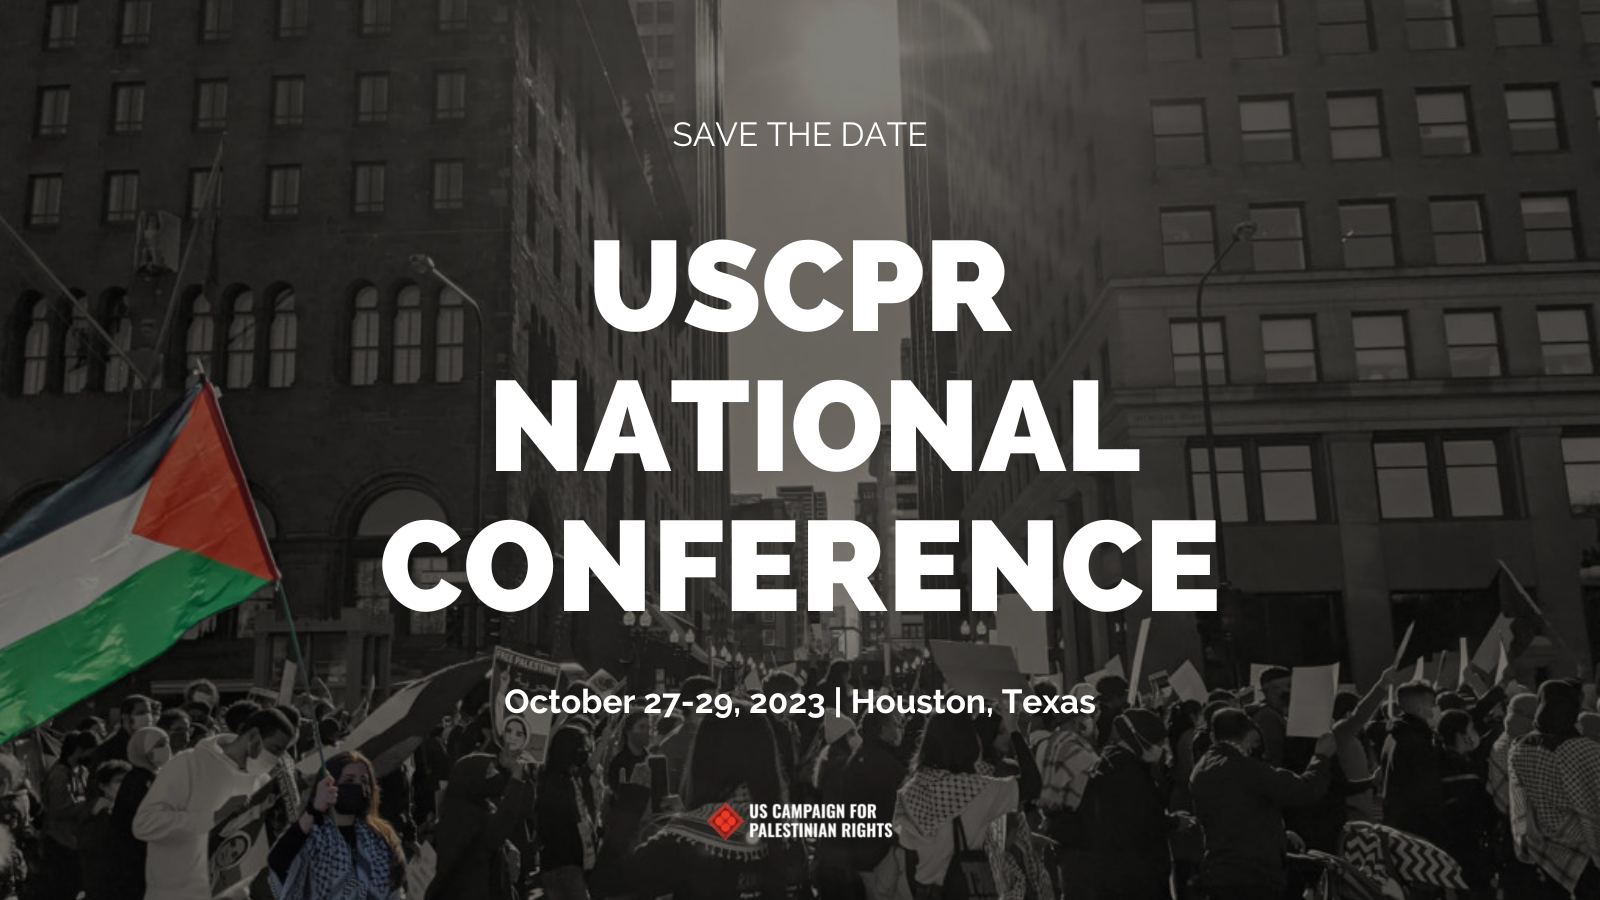 Save the Date Natl Conference (Twitter)